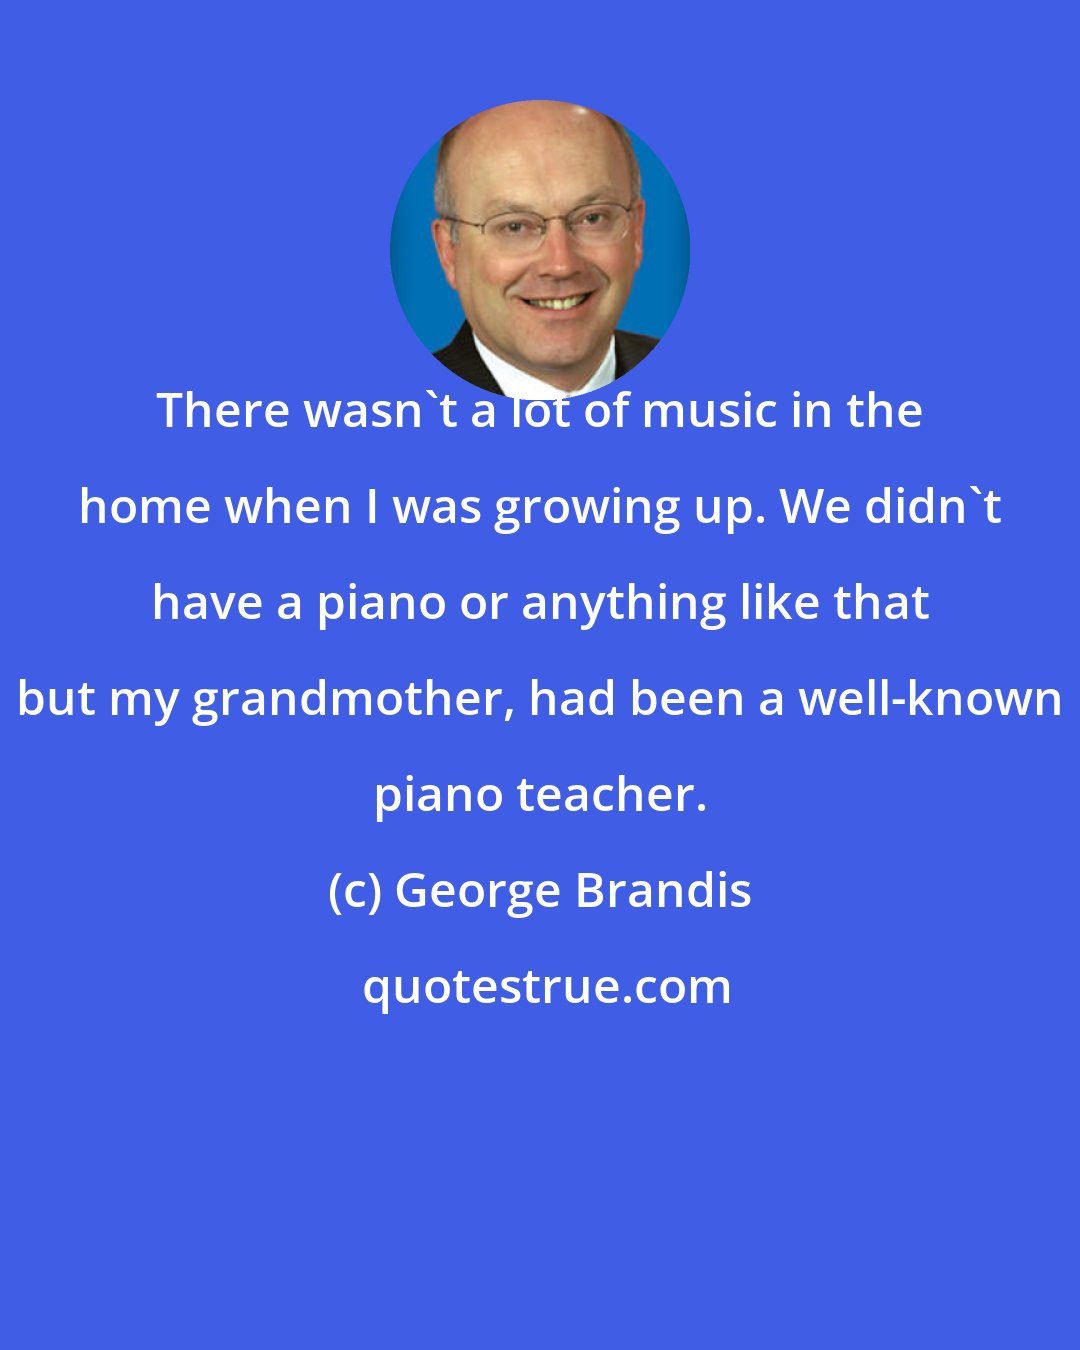 George Brandis: There wasn't a lot of music in the home when I was growing up. We didn't have a piano or anything like that but my grandmother, had been a well-known piano teacher.